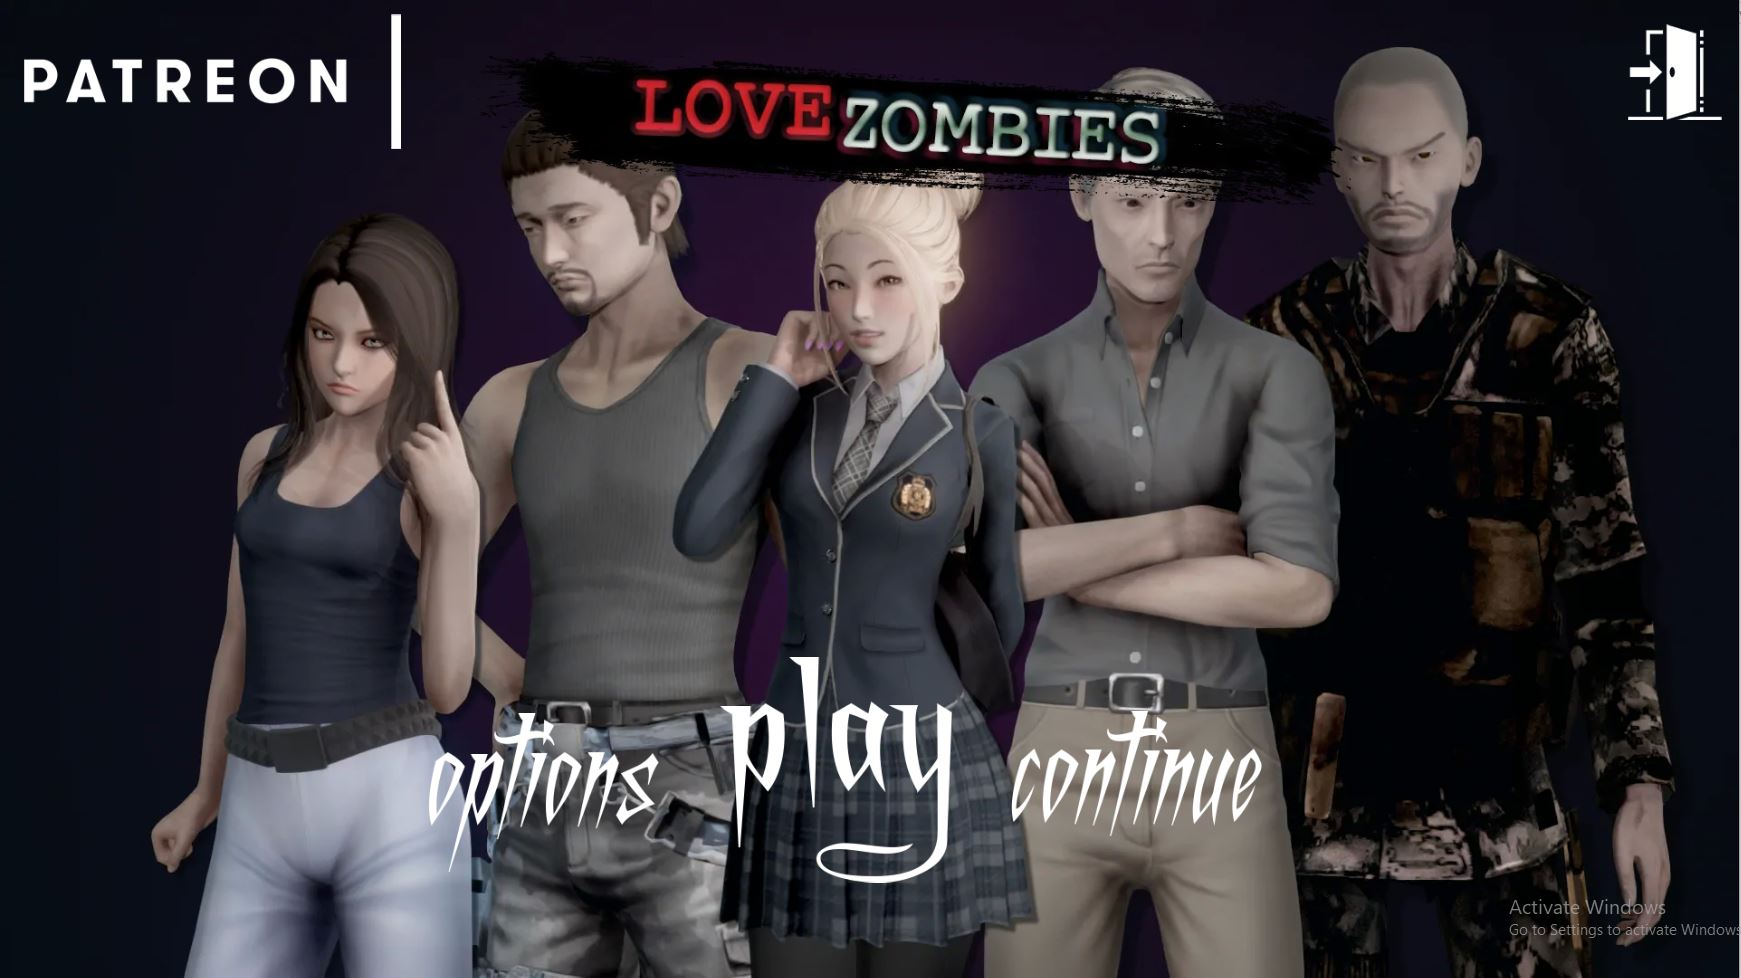 Love Zombies pic pic